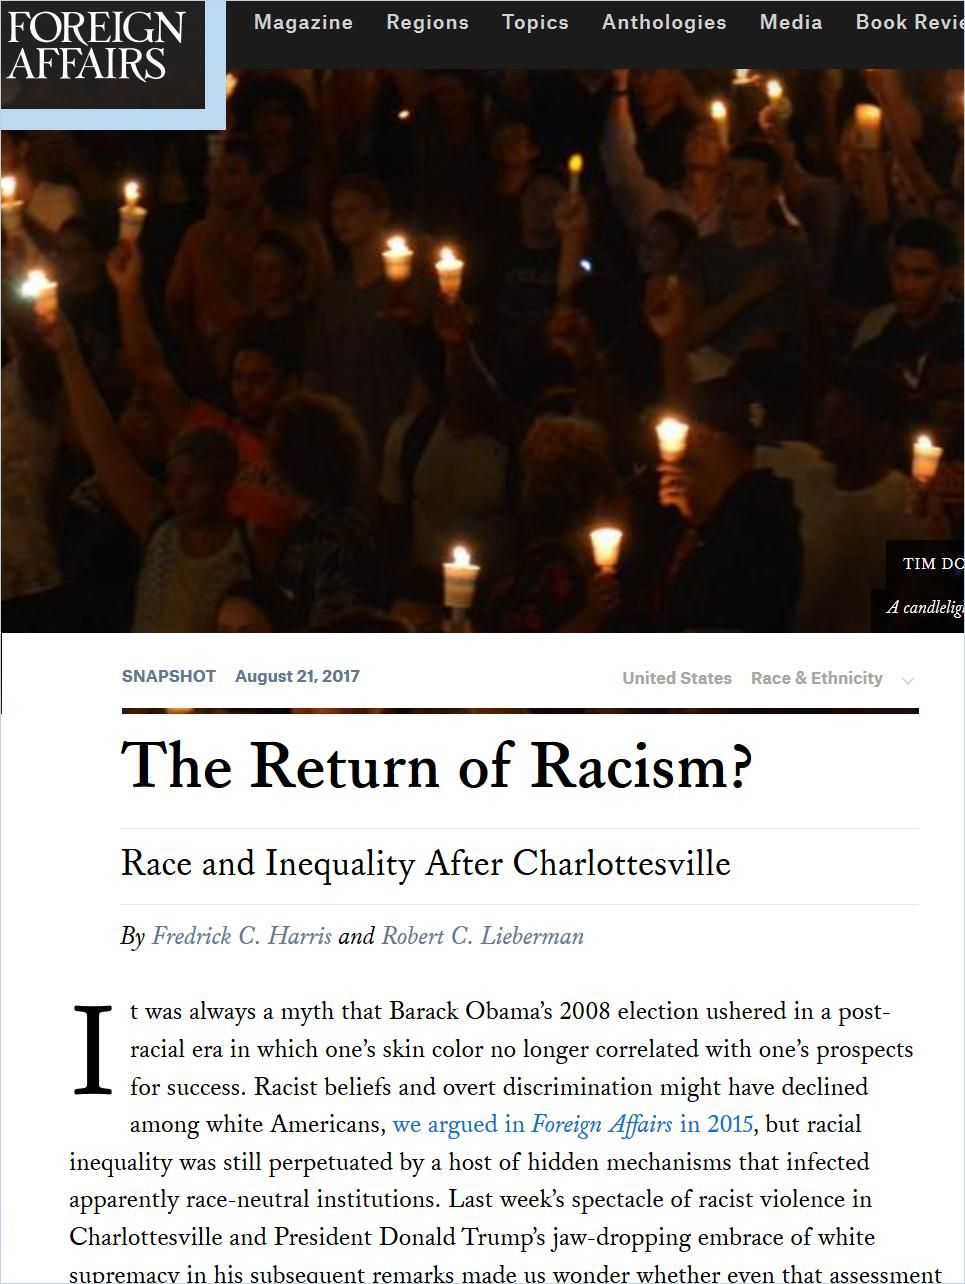 The Return of Racism? Book Cover